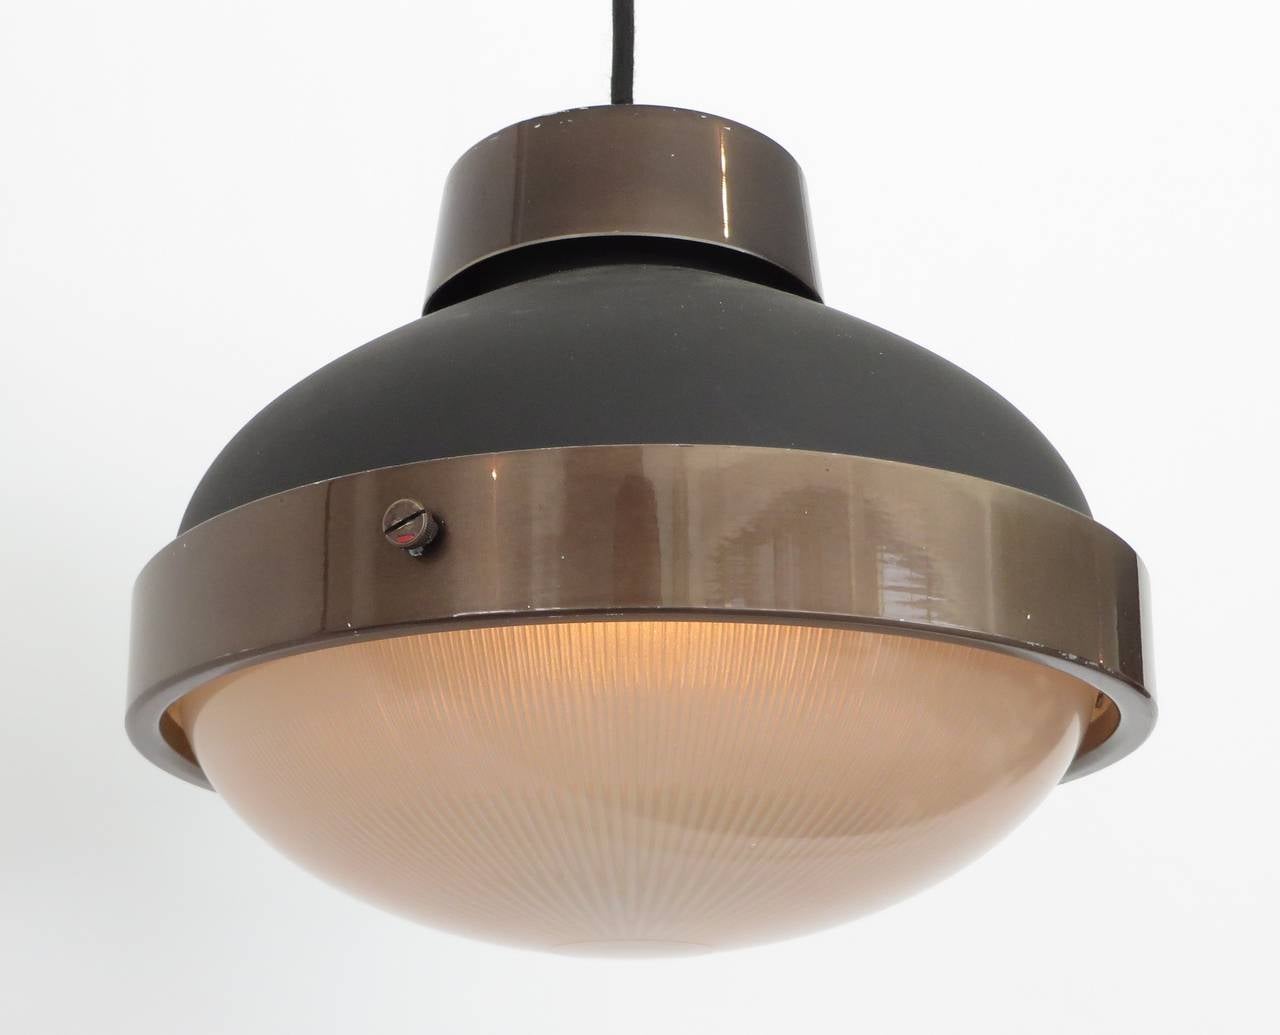 Gino Sarfatti Model 3027p, Italian ceiling lamp, circa 1960 that has been retrofitted to be a pendant but the original usage was as a ceiling fixture. This is in its beautiful original patina as found but It can be more highly polished. Pearl black